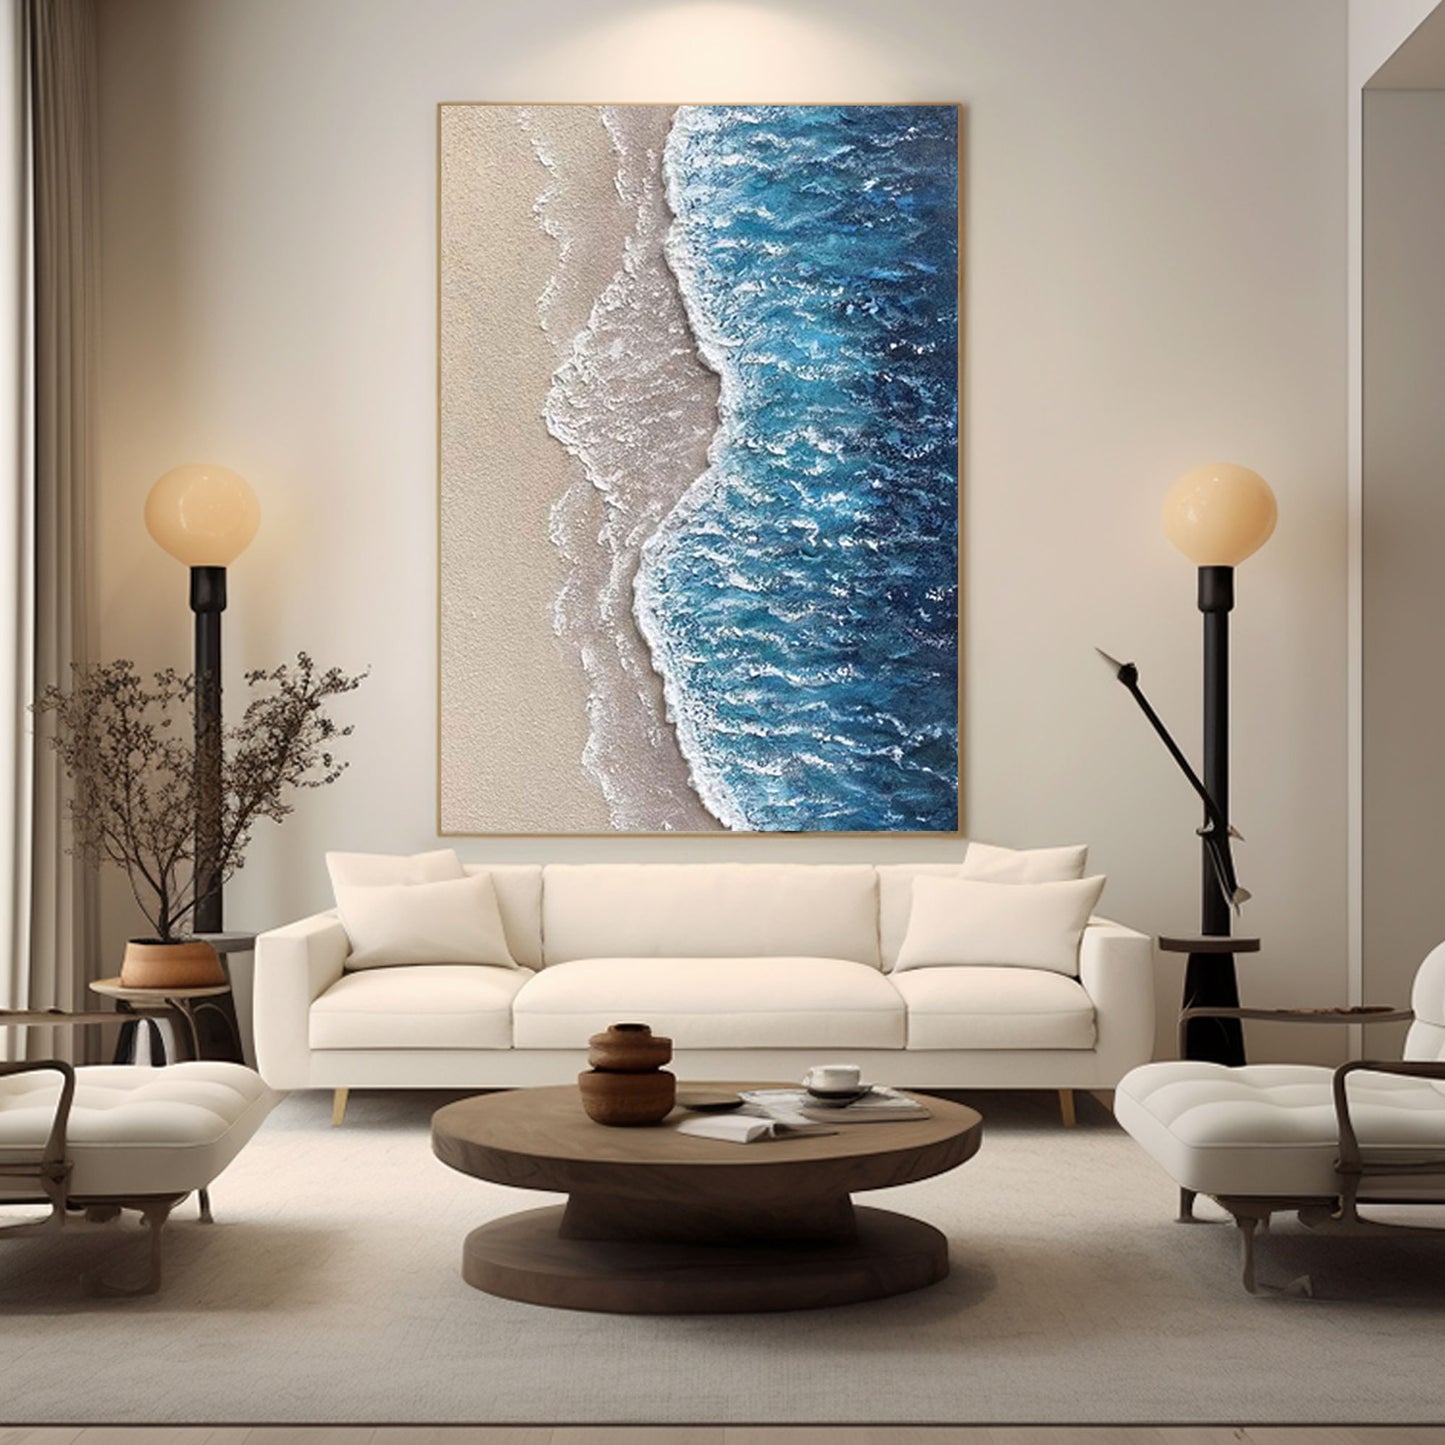 Abstract Textured Painting  "Ocean's Caress"